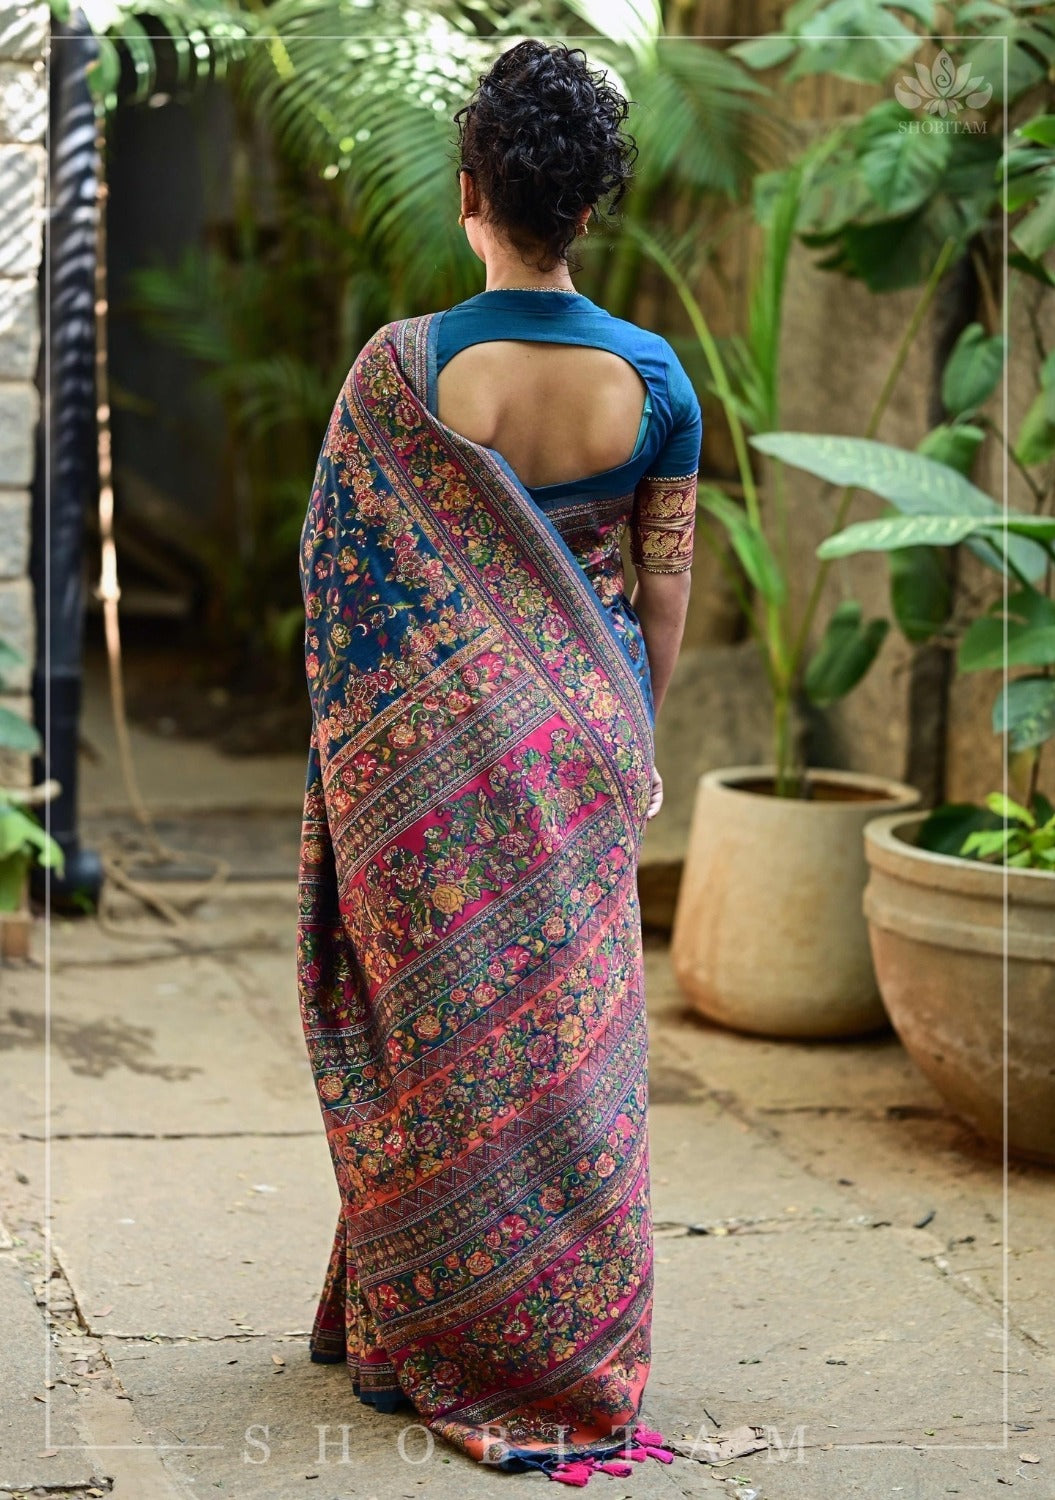 Kani Design with Floral Jaal in Teal and Red Rayon Saree